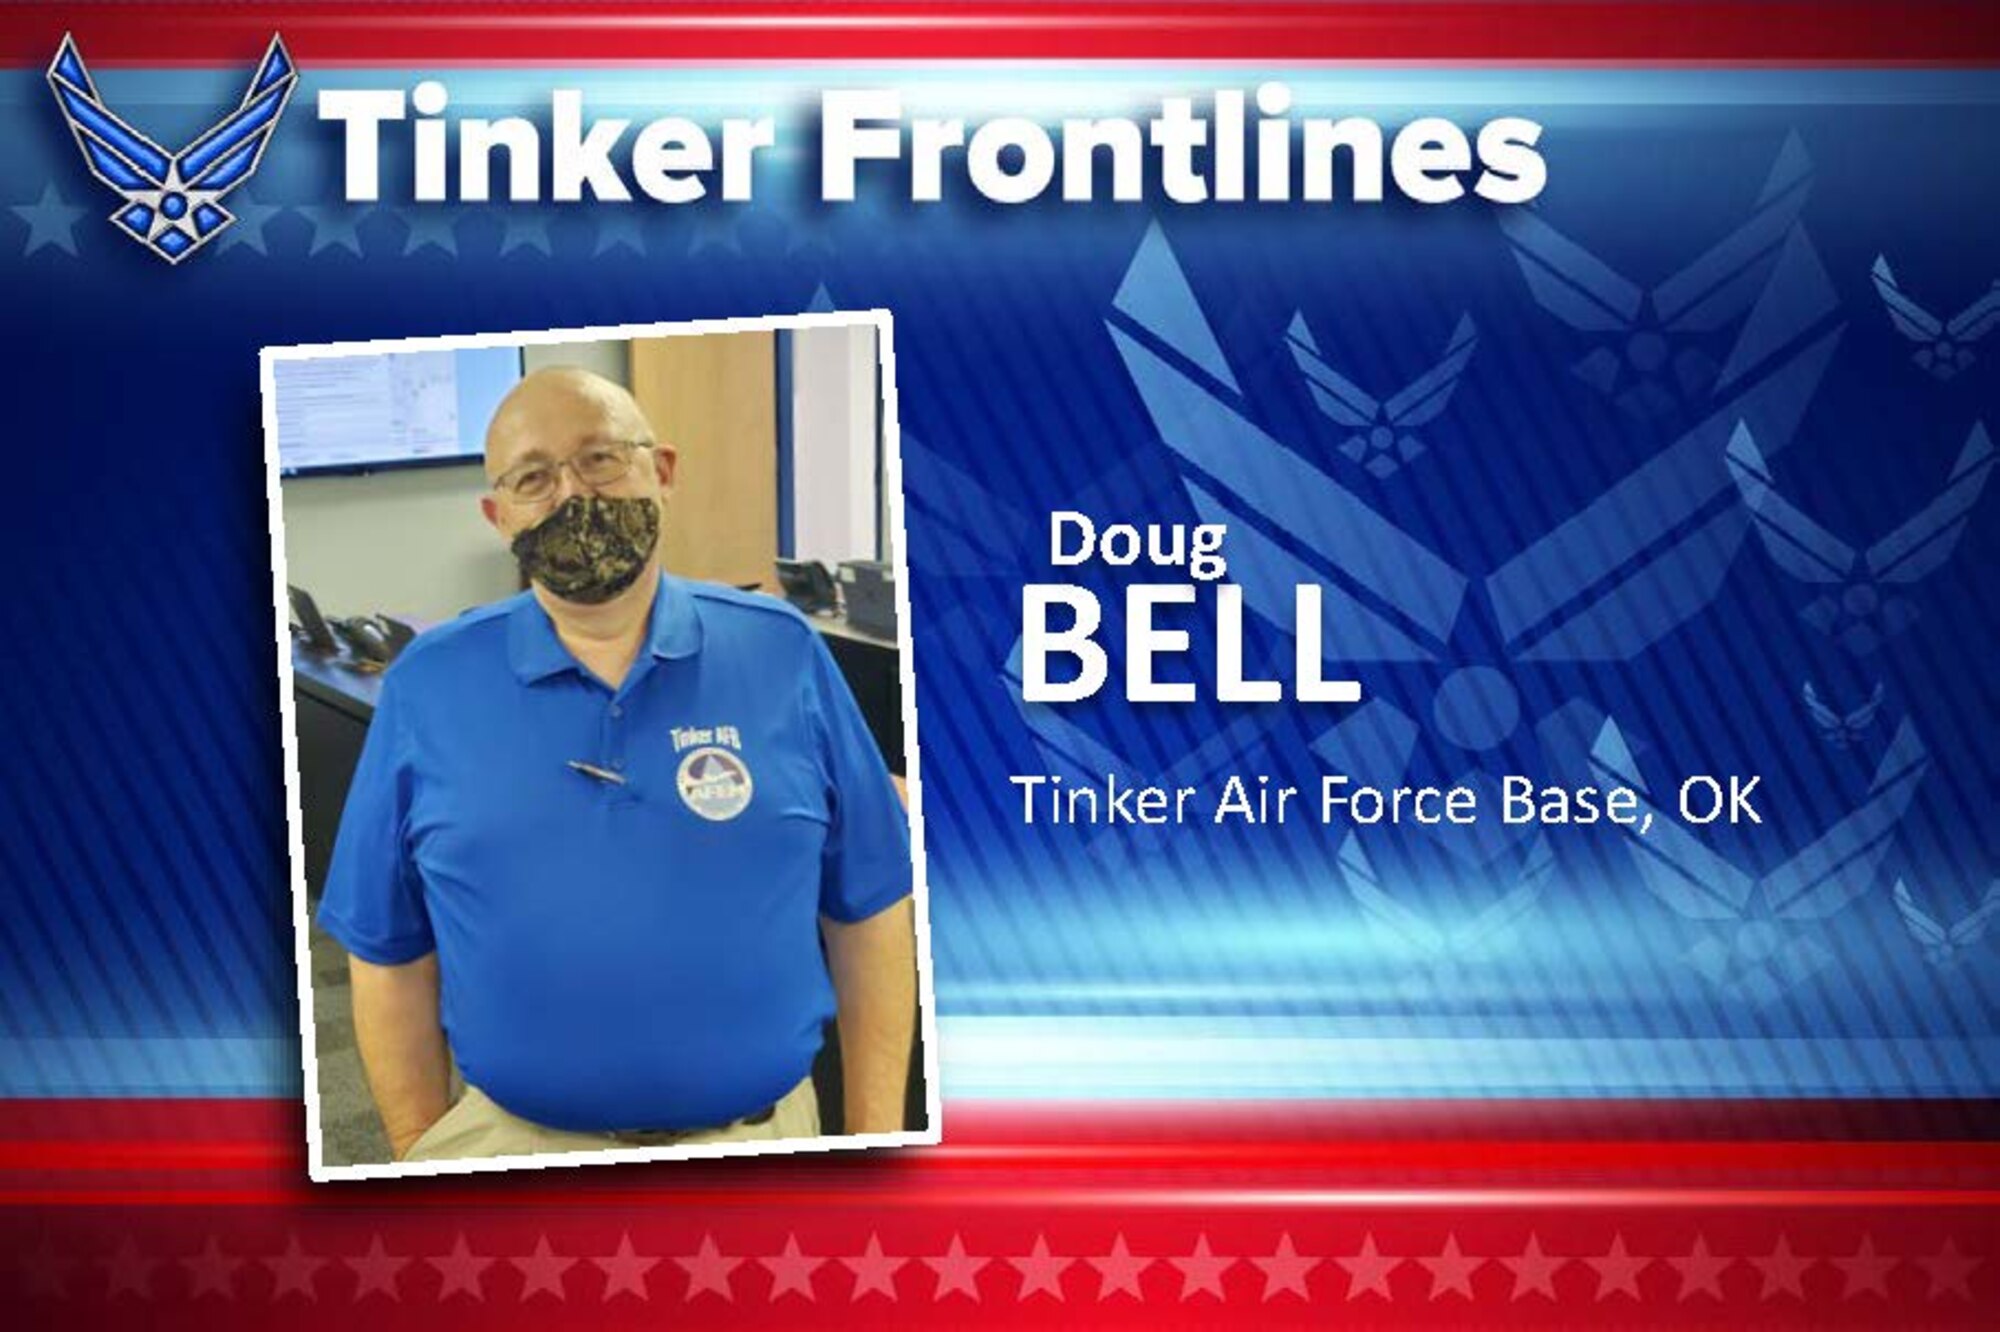 Doug Bell has worked as an Emergency Management Specialist for six months in the 72nd Civil Engineering Directorate Emergency Operations Center.